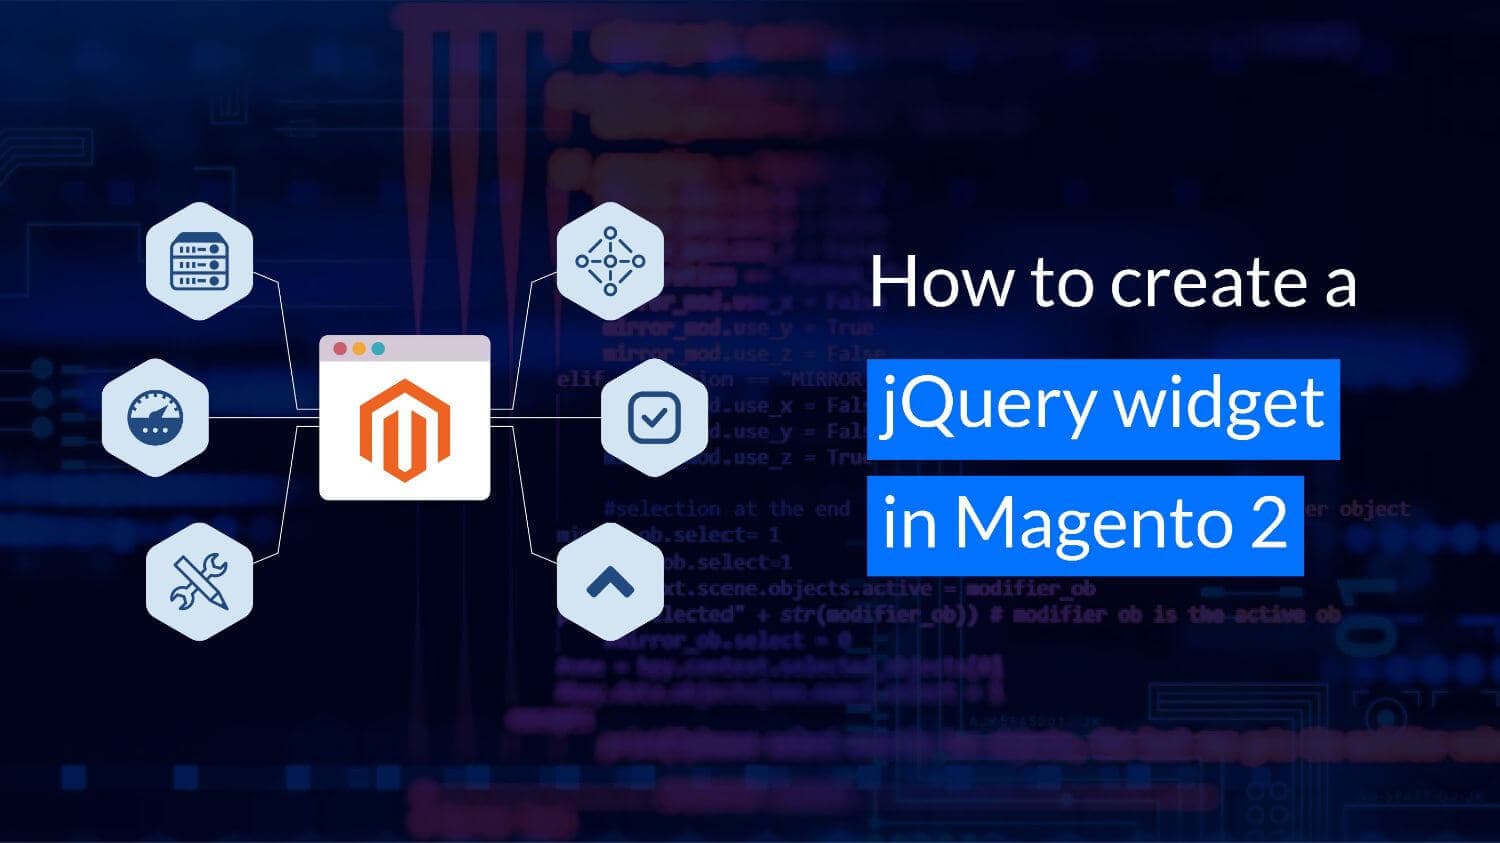 How to create a jQuery widget in Magento 2 title image